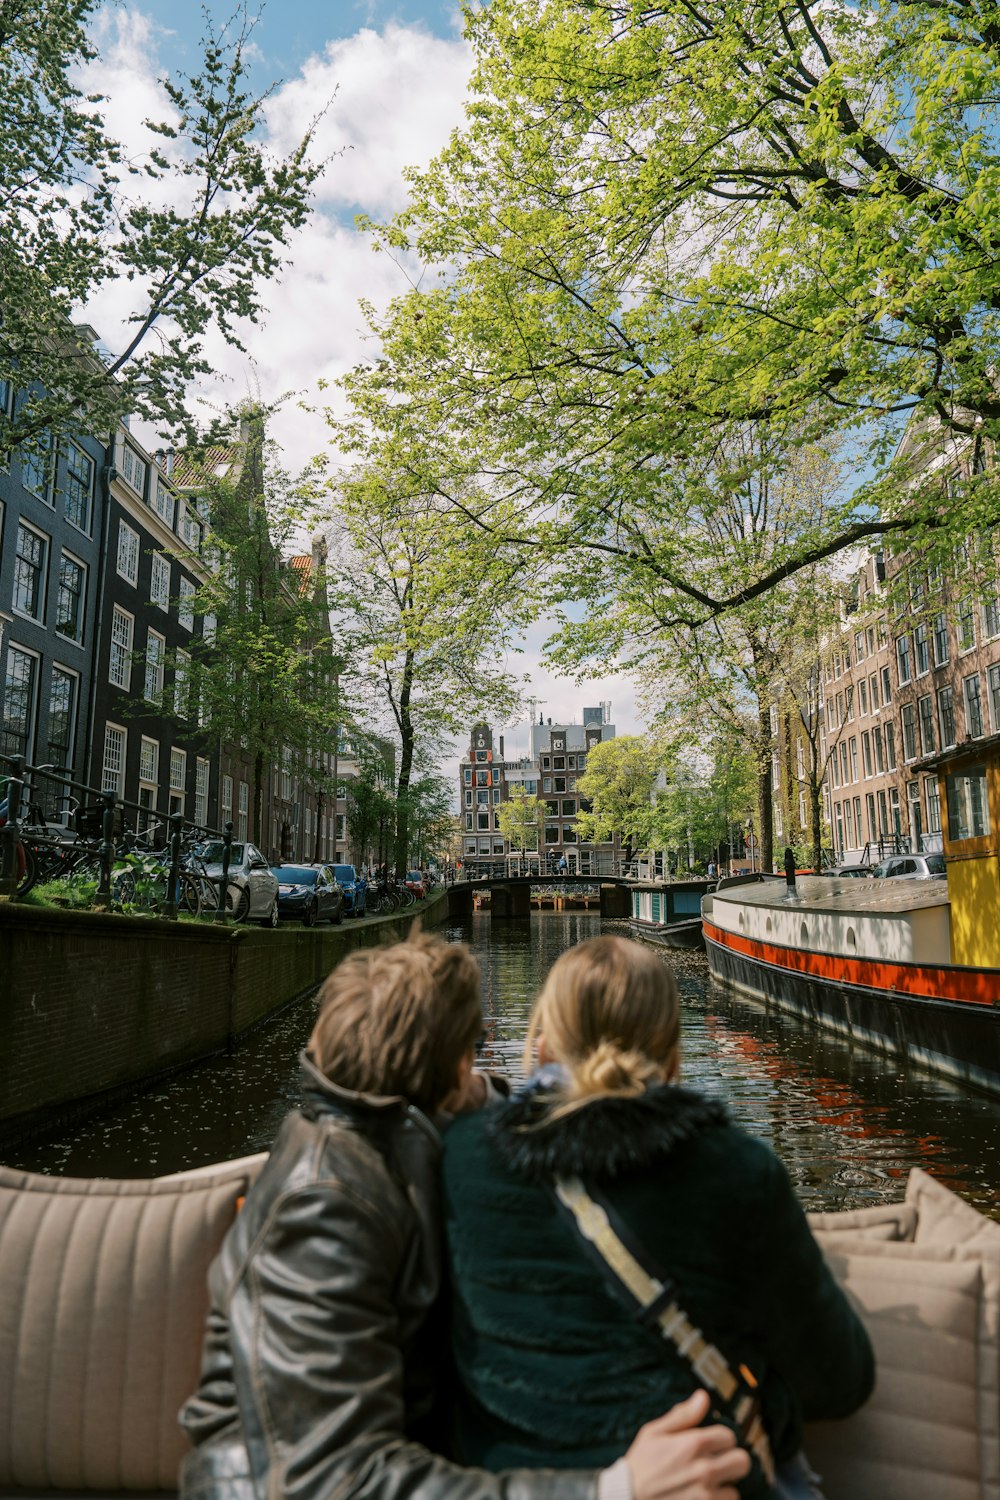 two people are sitting on a boat in a canal